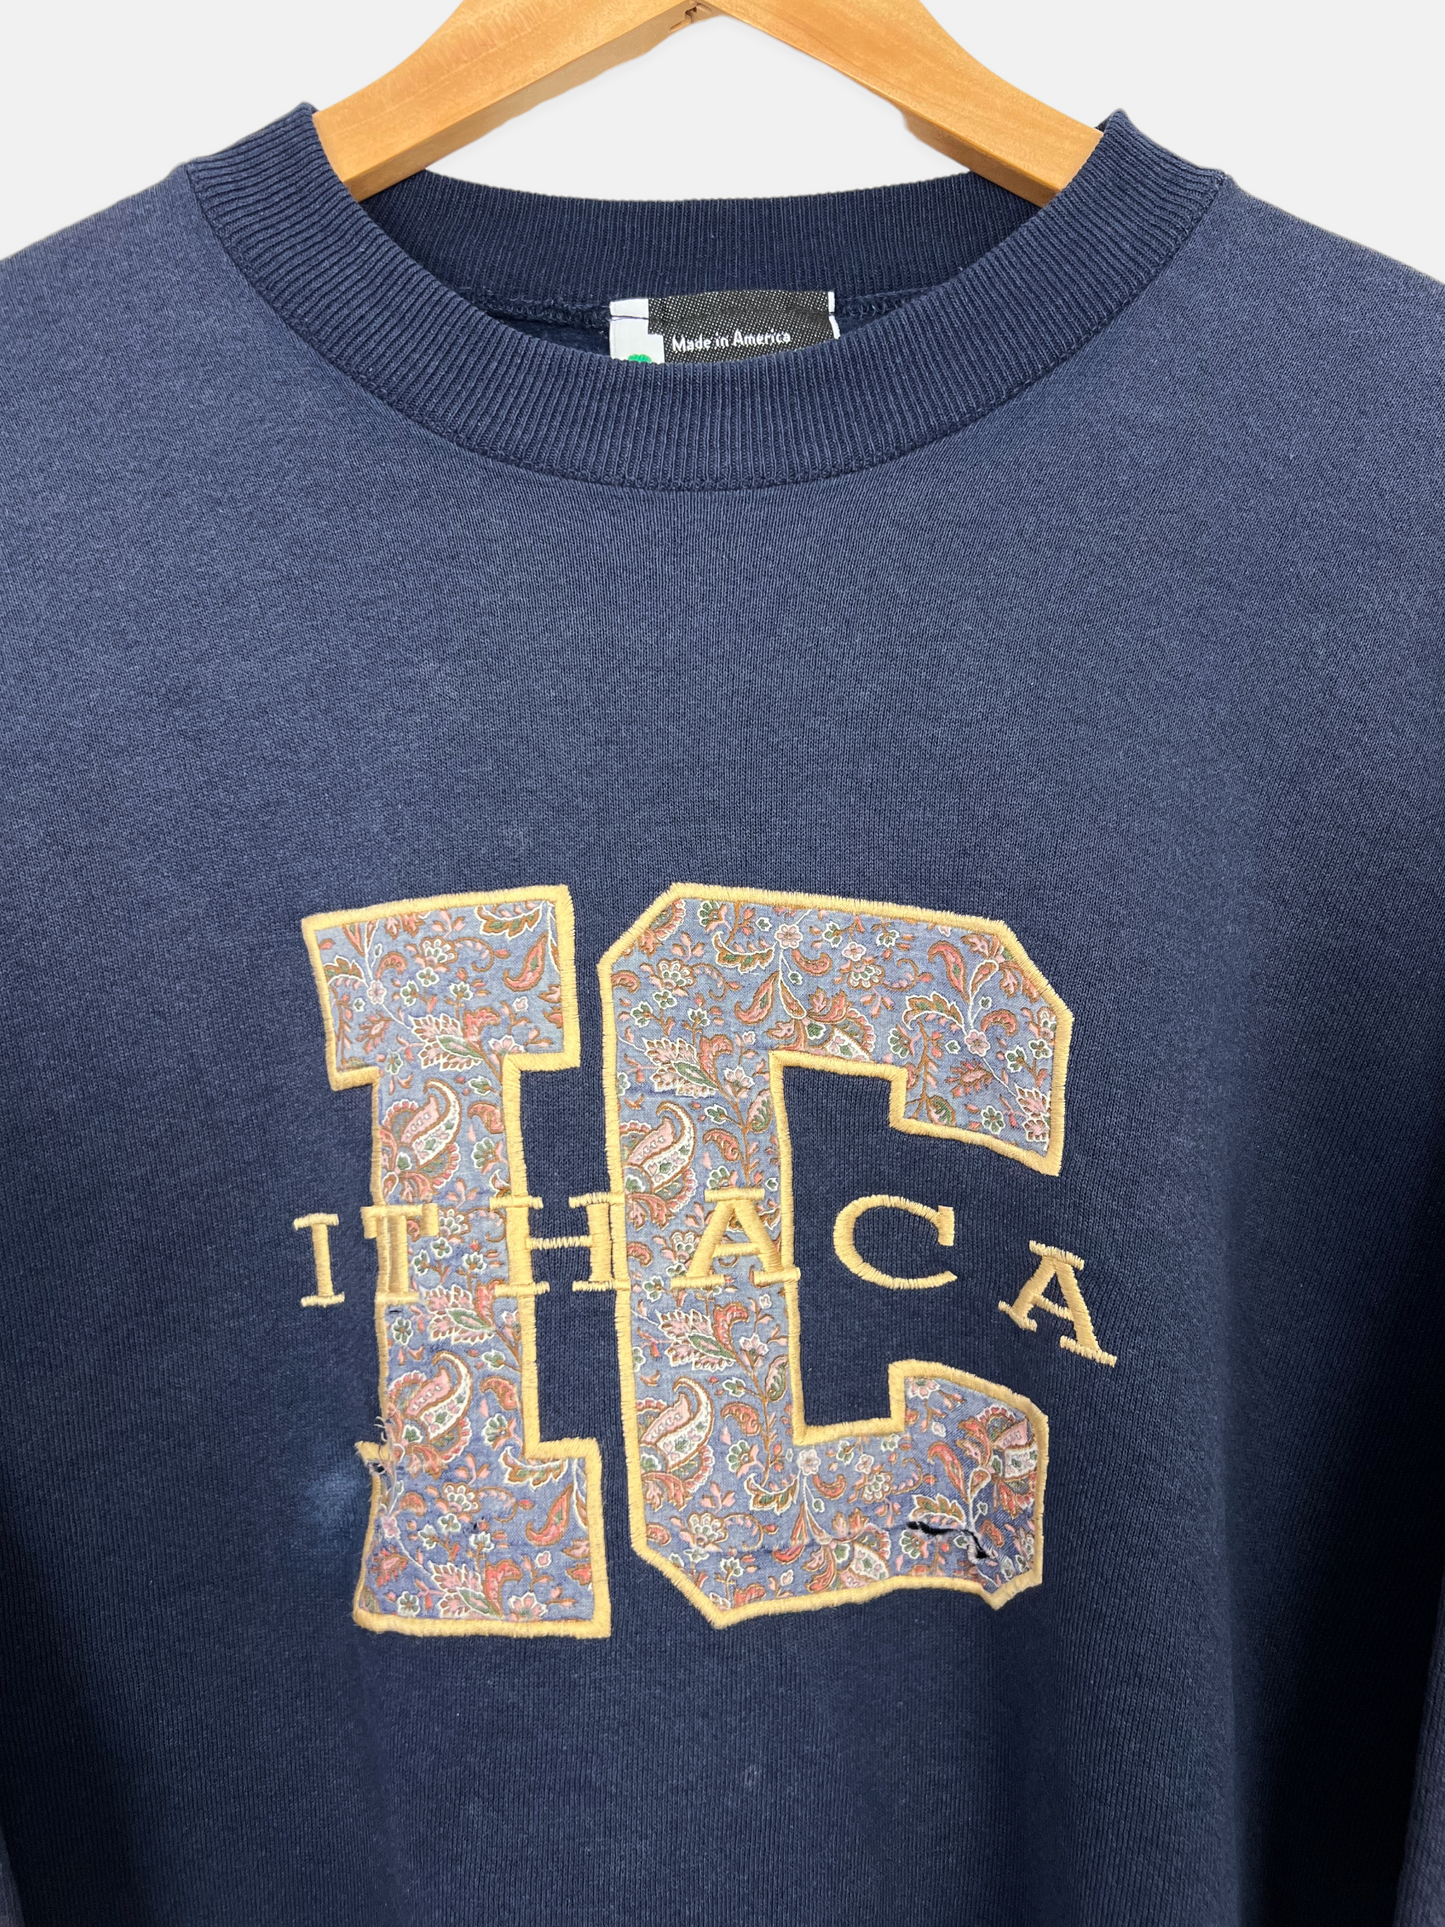 90's Ithaca College USA Made Embroidered Vintage Sweatshirt Size M-L